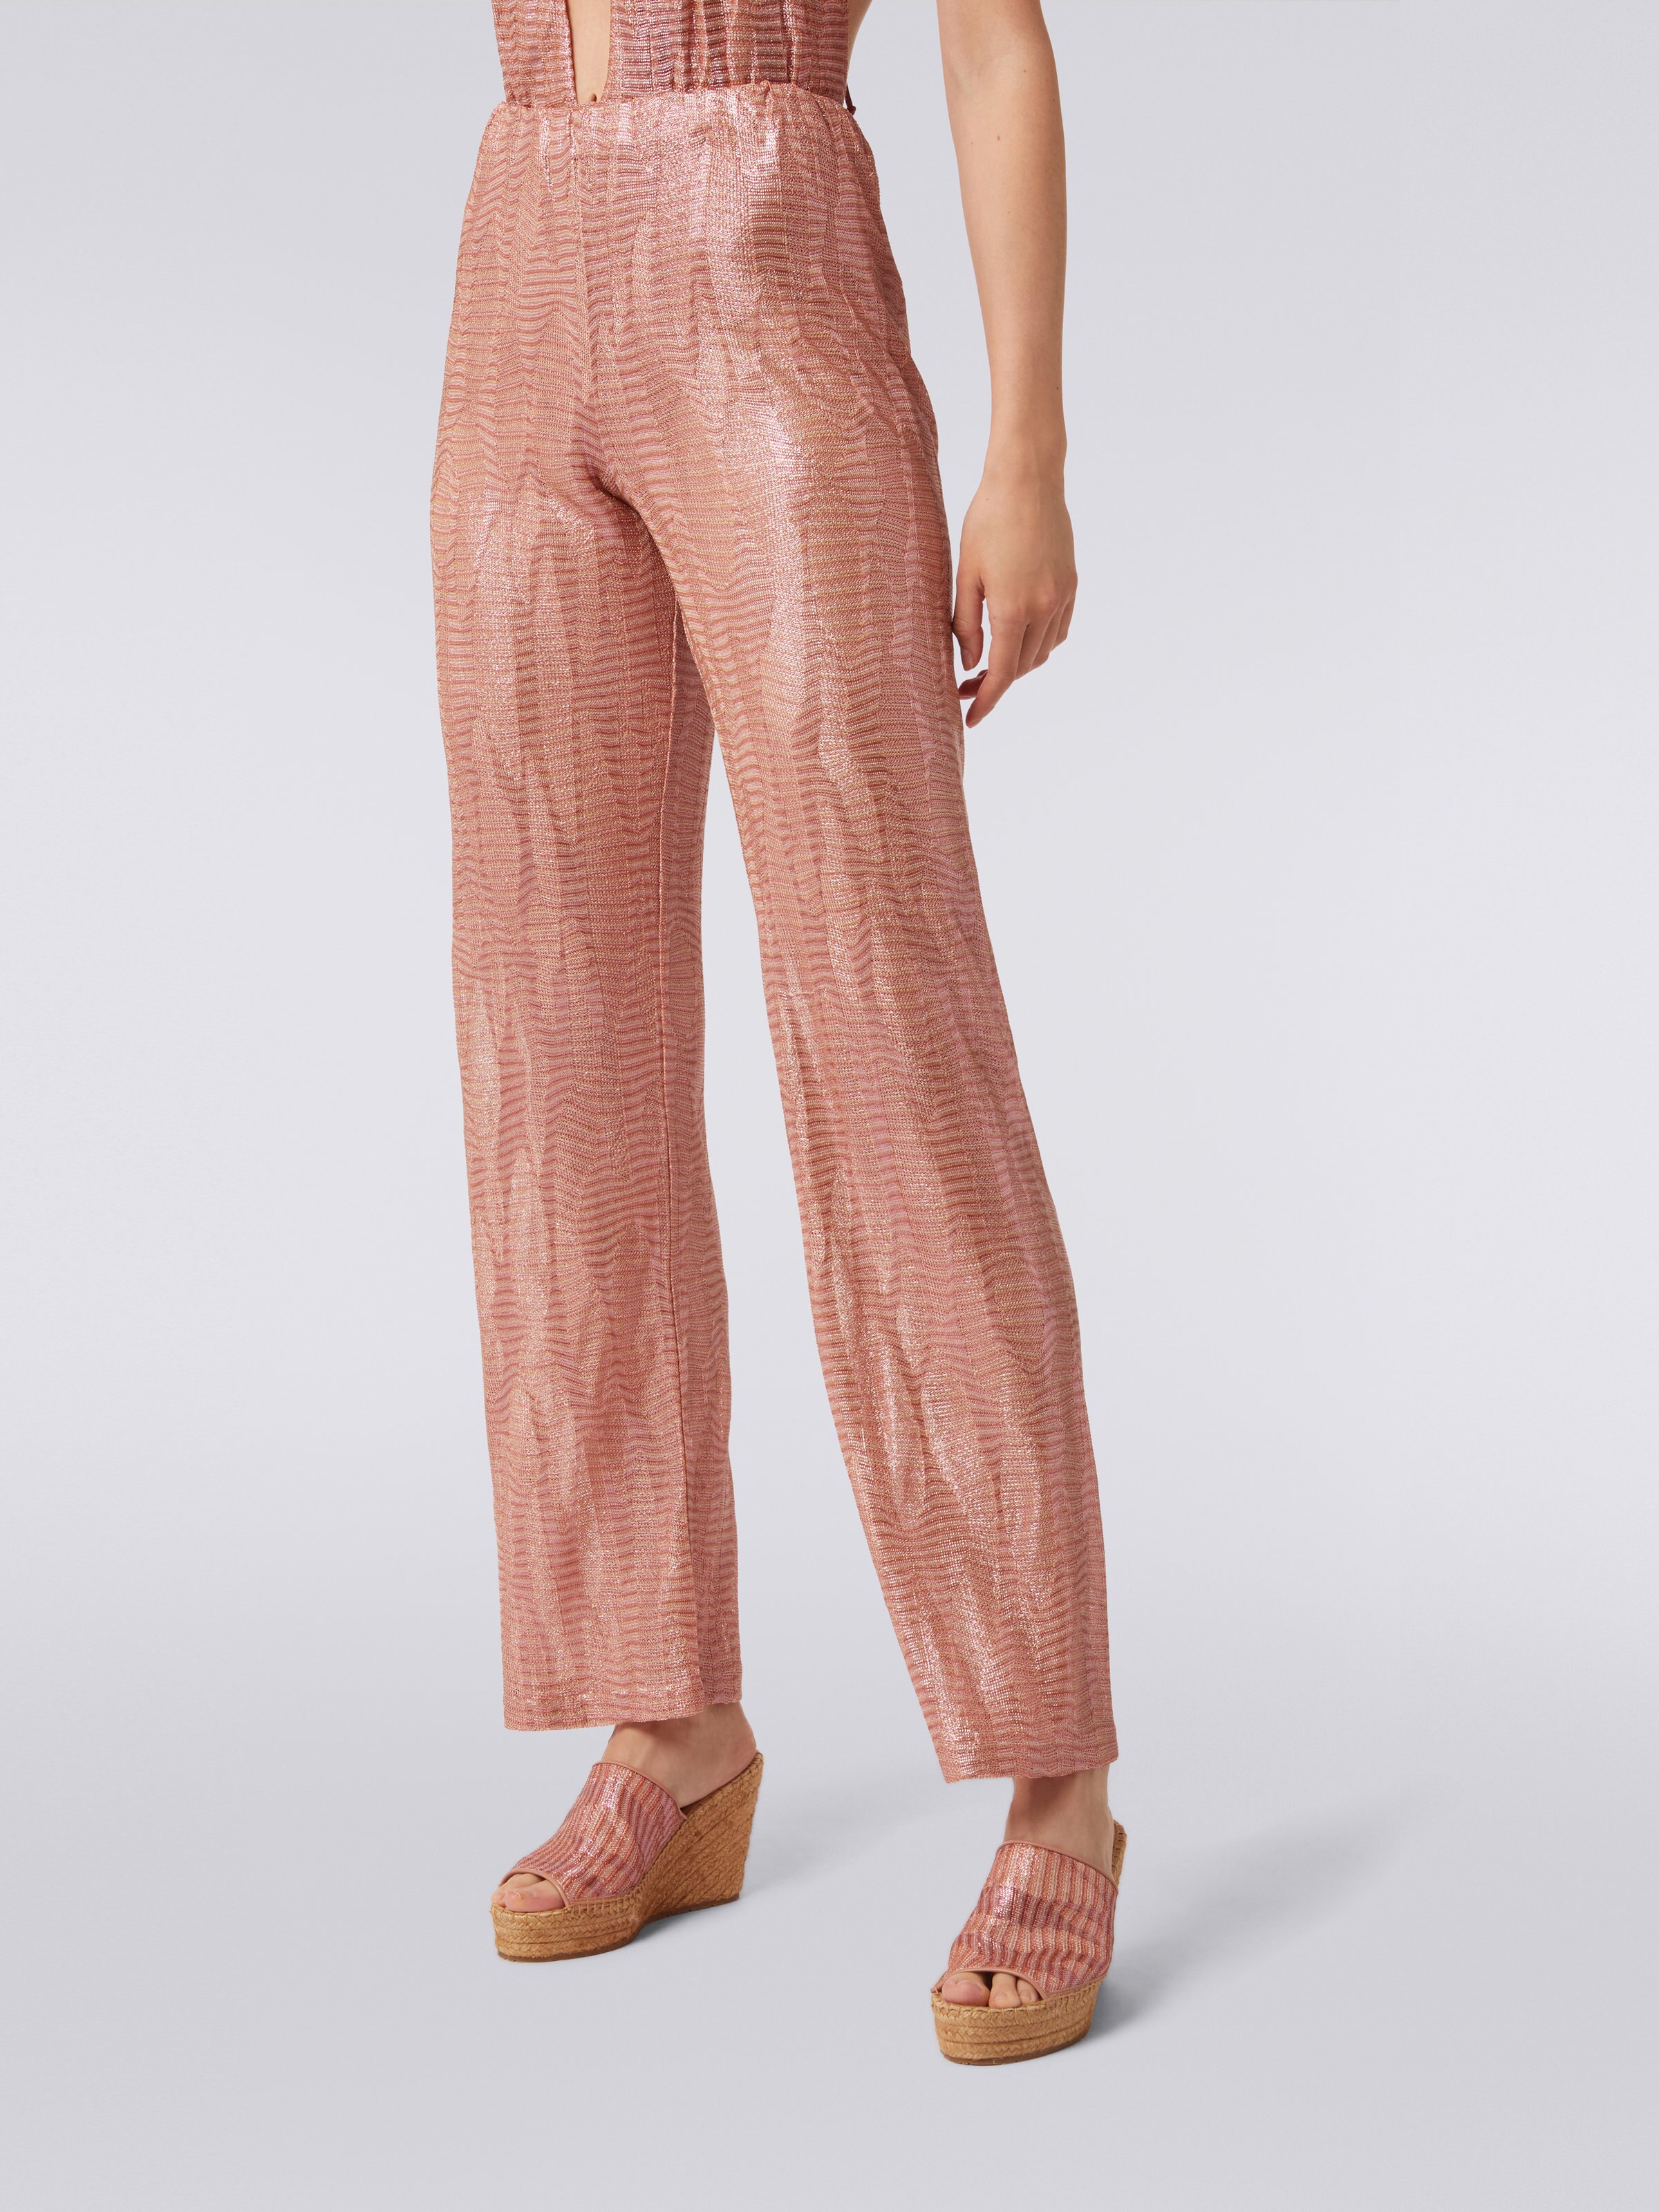 Straight trousers in jacquard viscose knit, Pink - 4